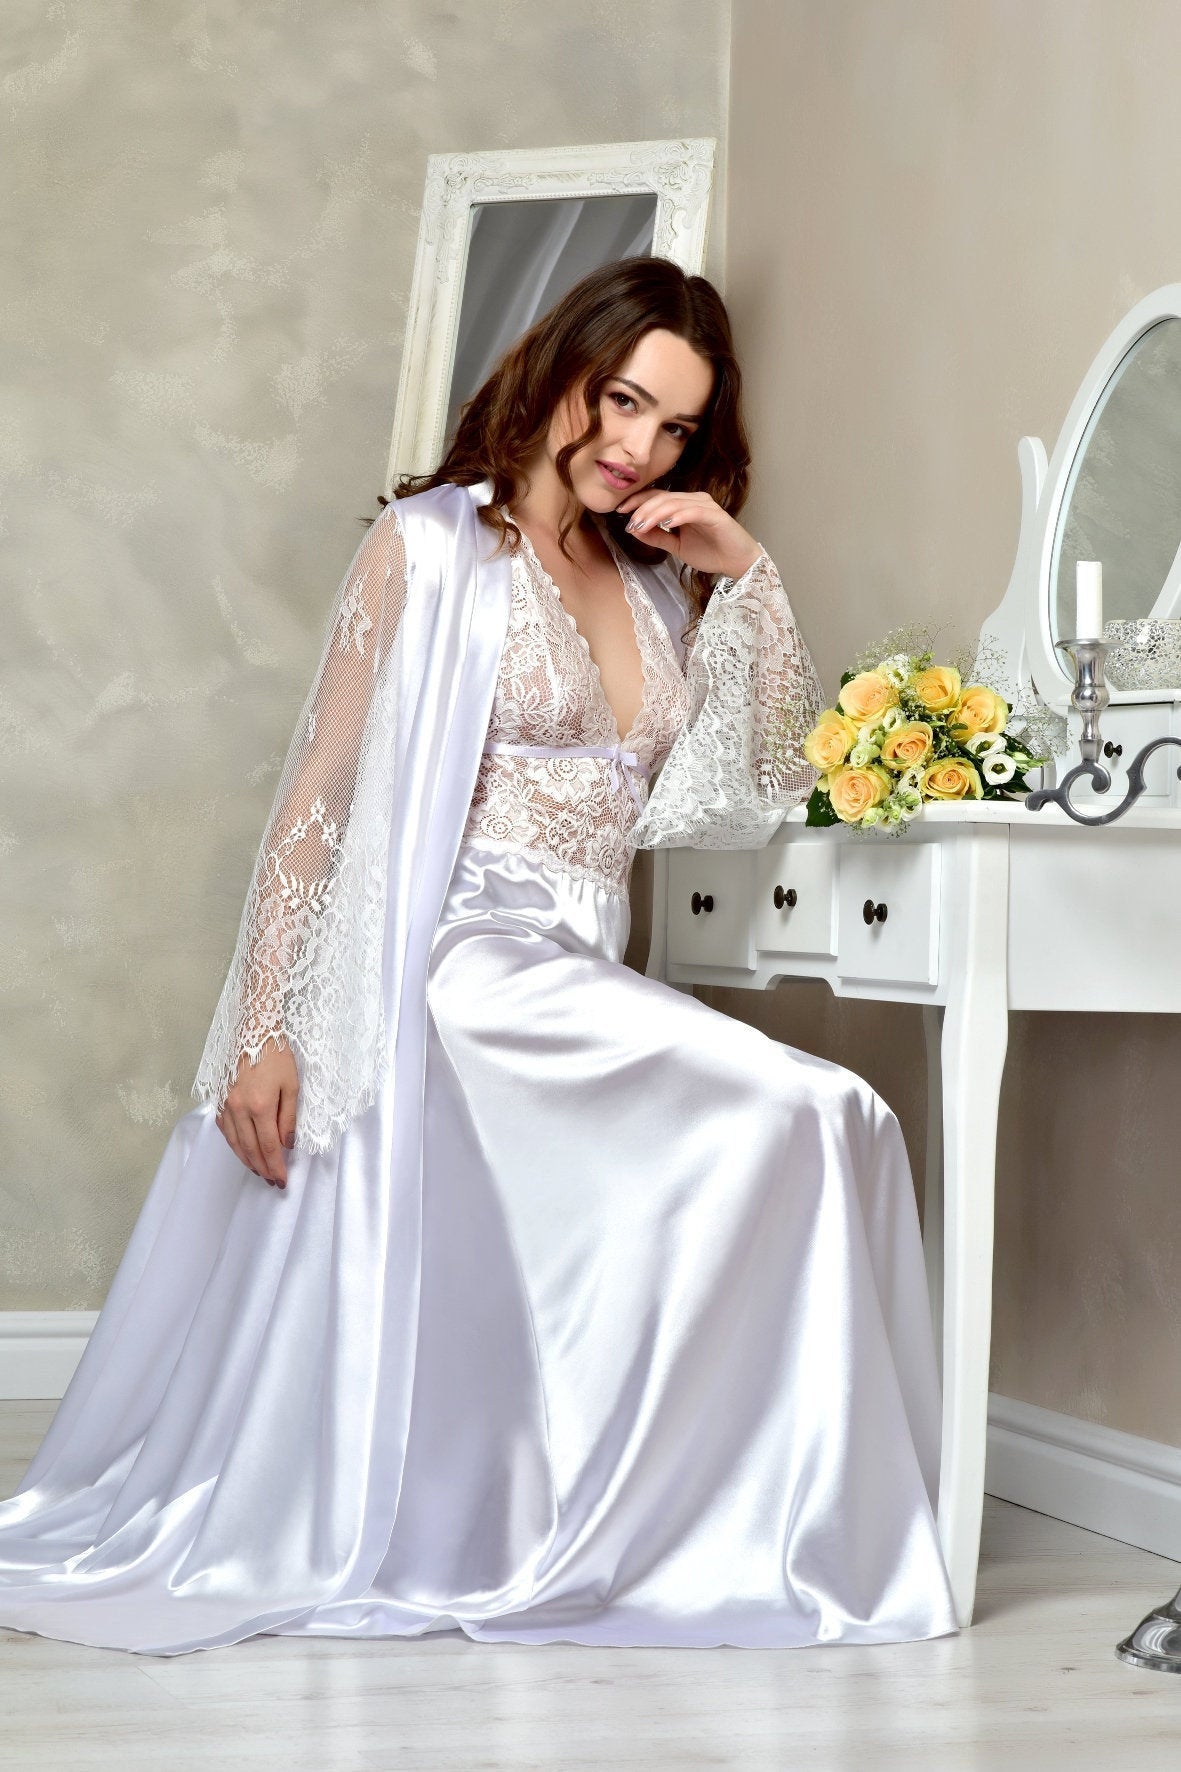 Seductive Bridal Peignoir Set in White: Nightgown and Robe – Marrysol